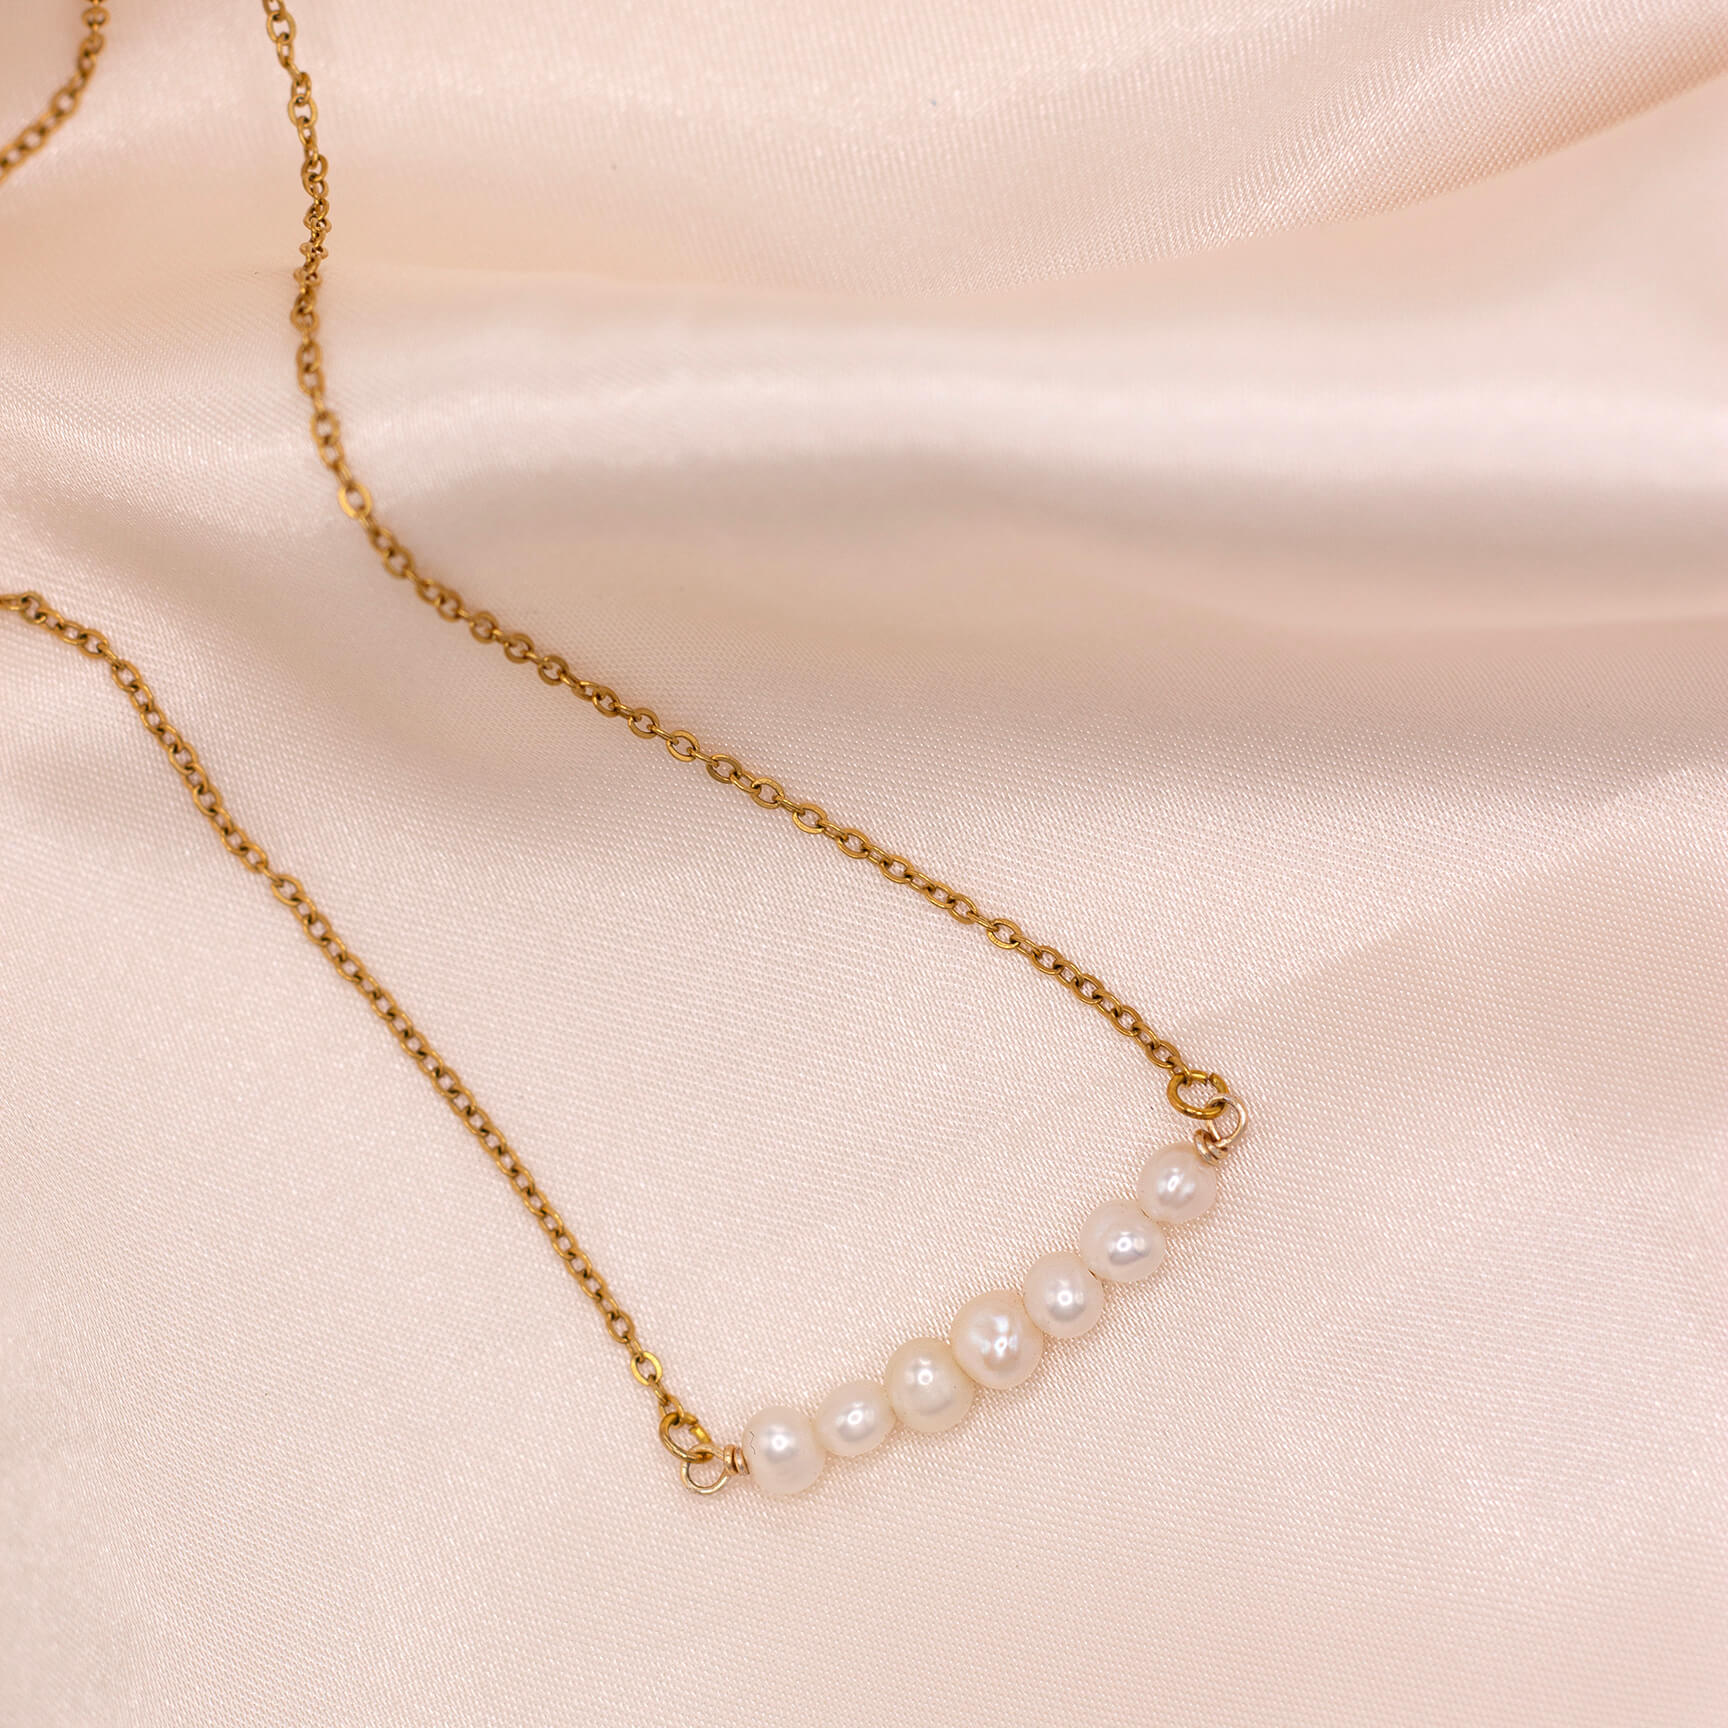 Minimalist pearl bar necklace with dainty freshwater pearls and gold-plated stainless steel chain. Waterproof and hypoallergenic.